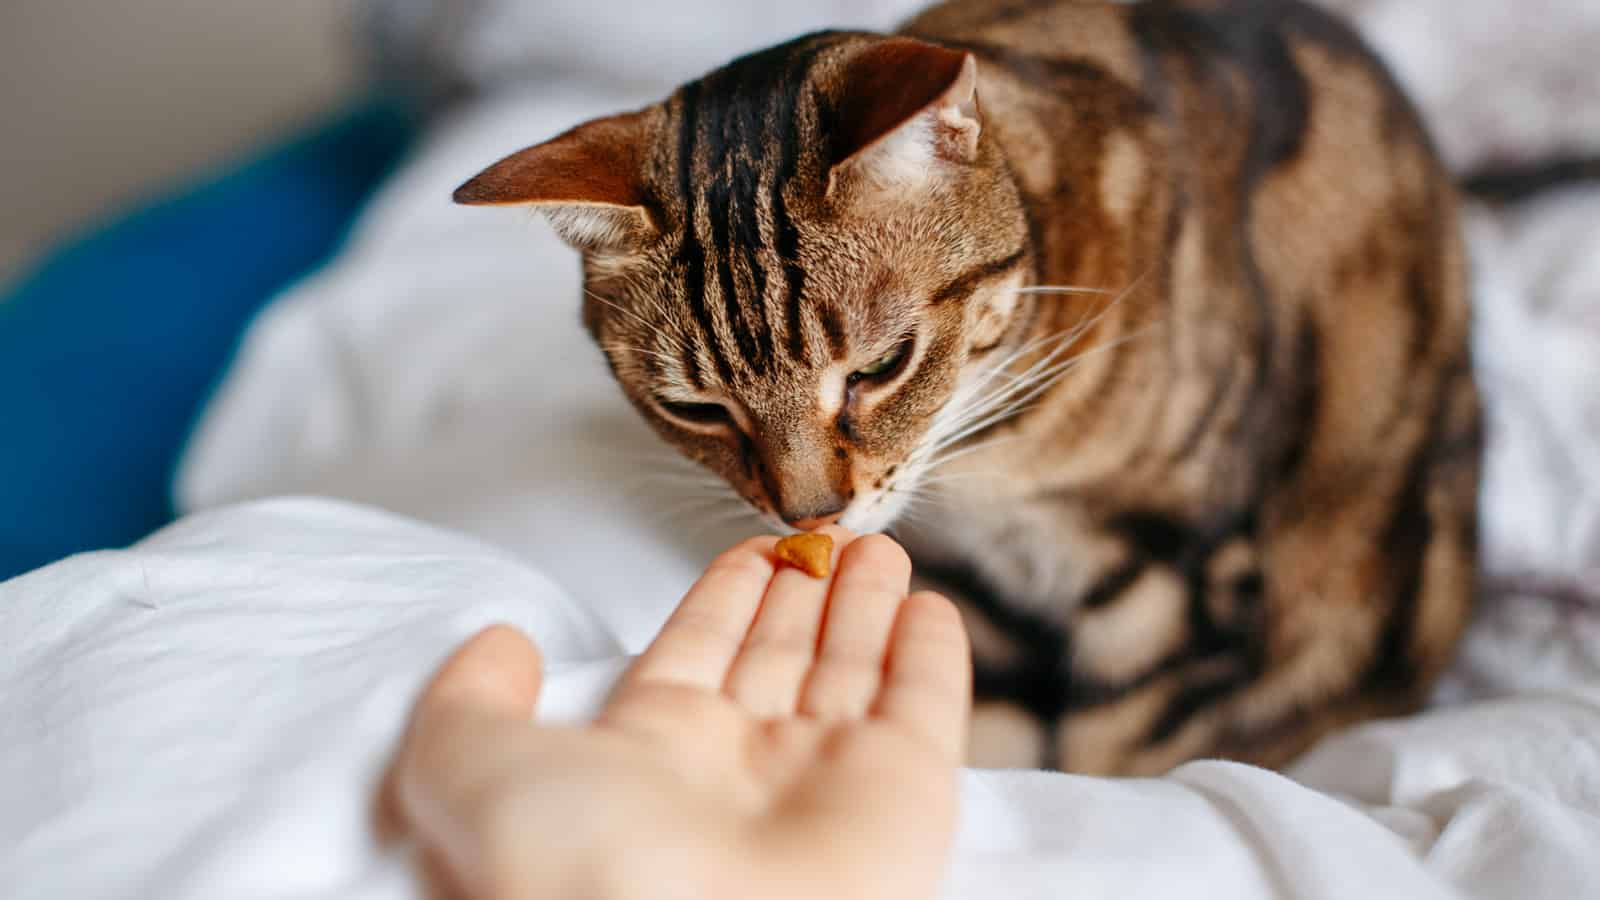 Pet owner feeding cat with dry food granules from hand palm. Man woman giving treat to cat. Beautiful domestic striped tabby feline kitten sitting on bed in bedroom.